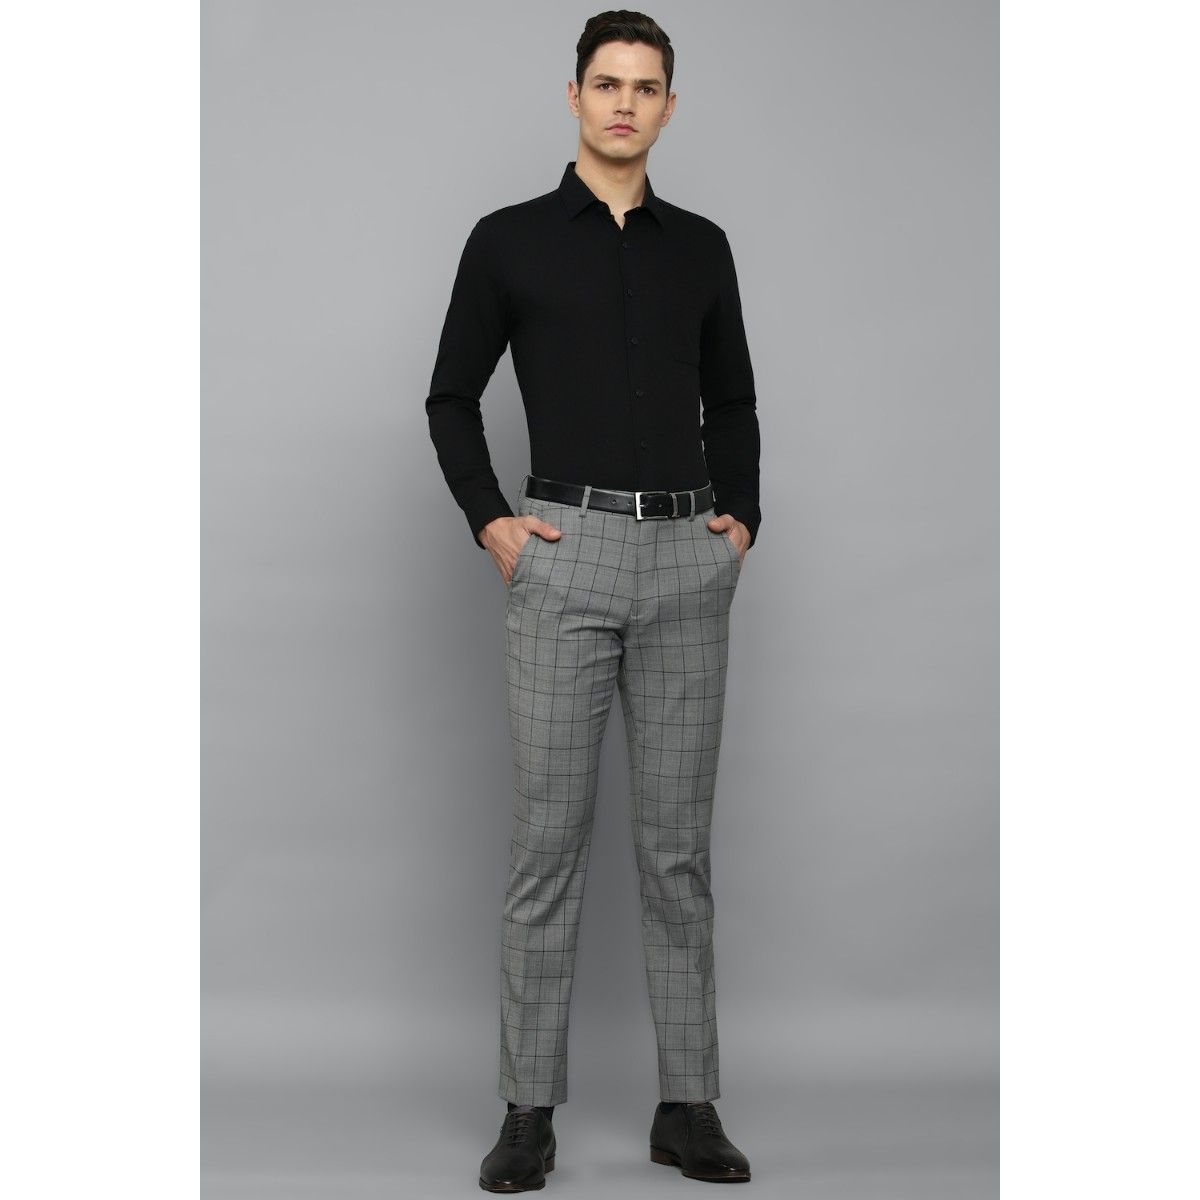 Louis philippe sports trousers  Buy Louis philippe sports trousers online  in India